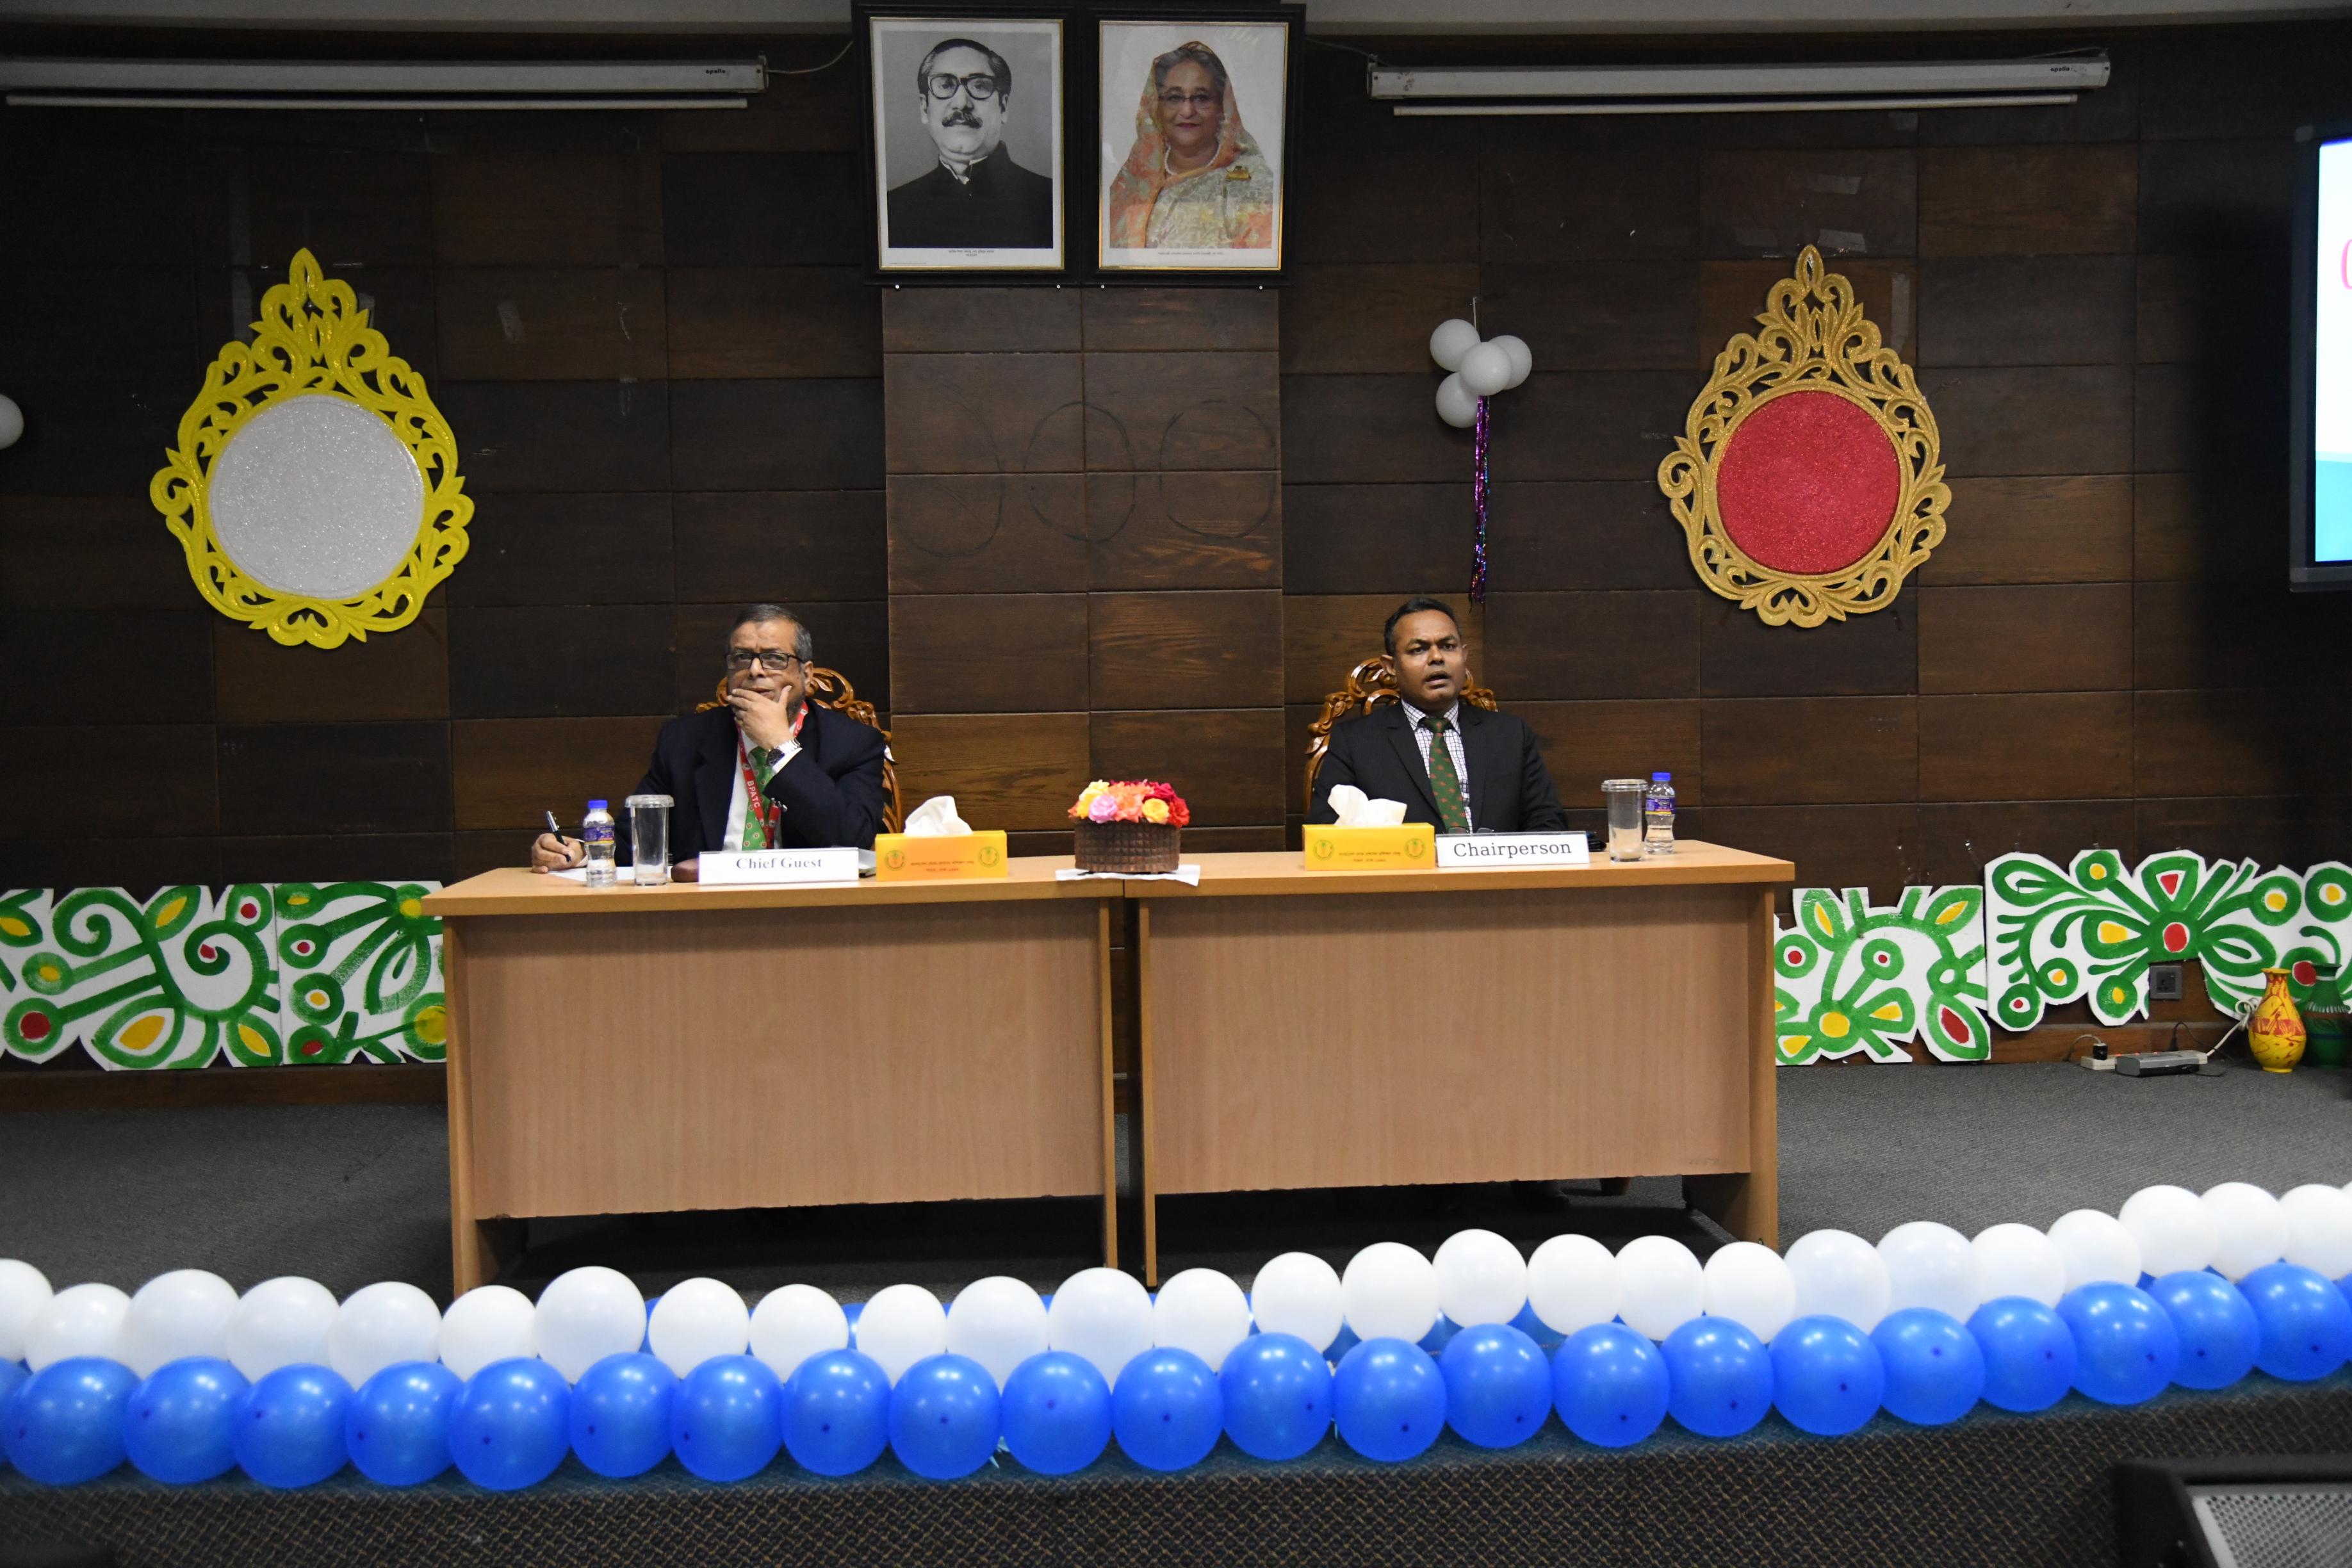 103rd SSC  Certificate ceremony